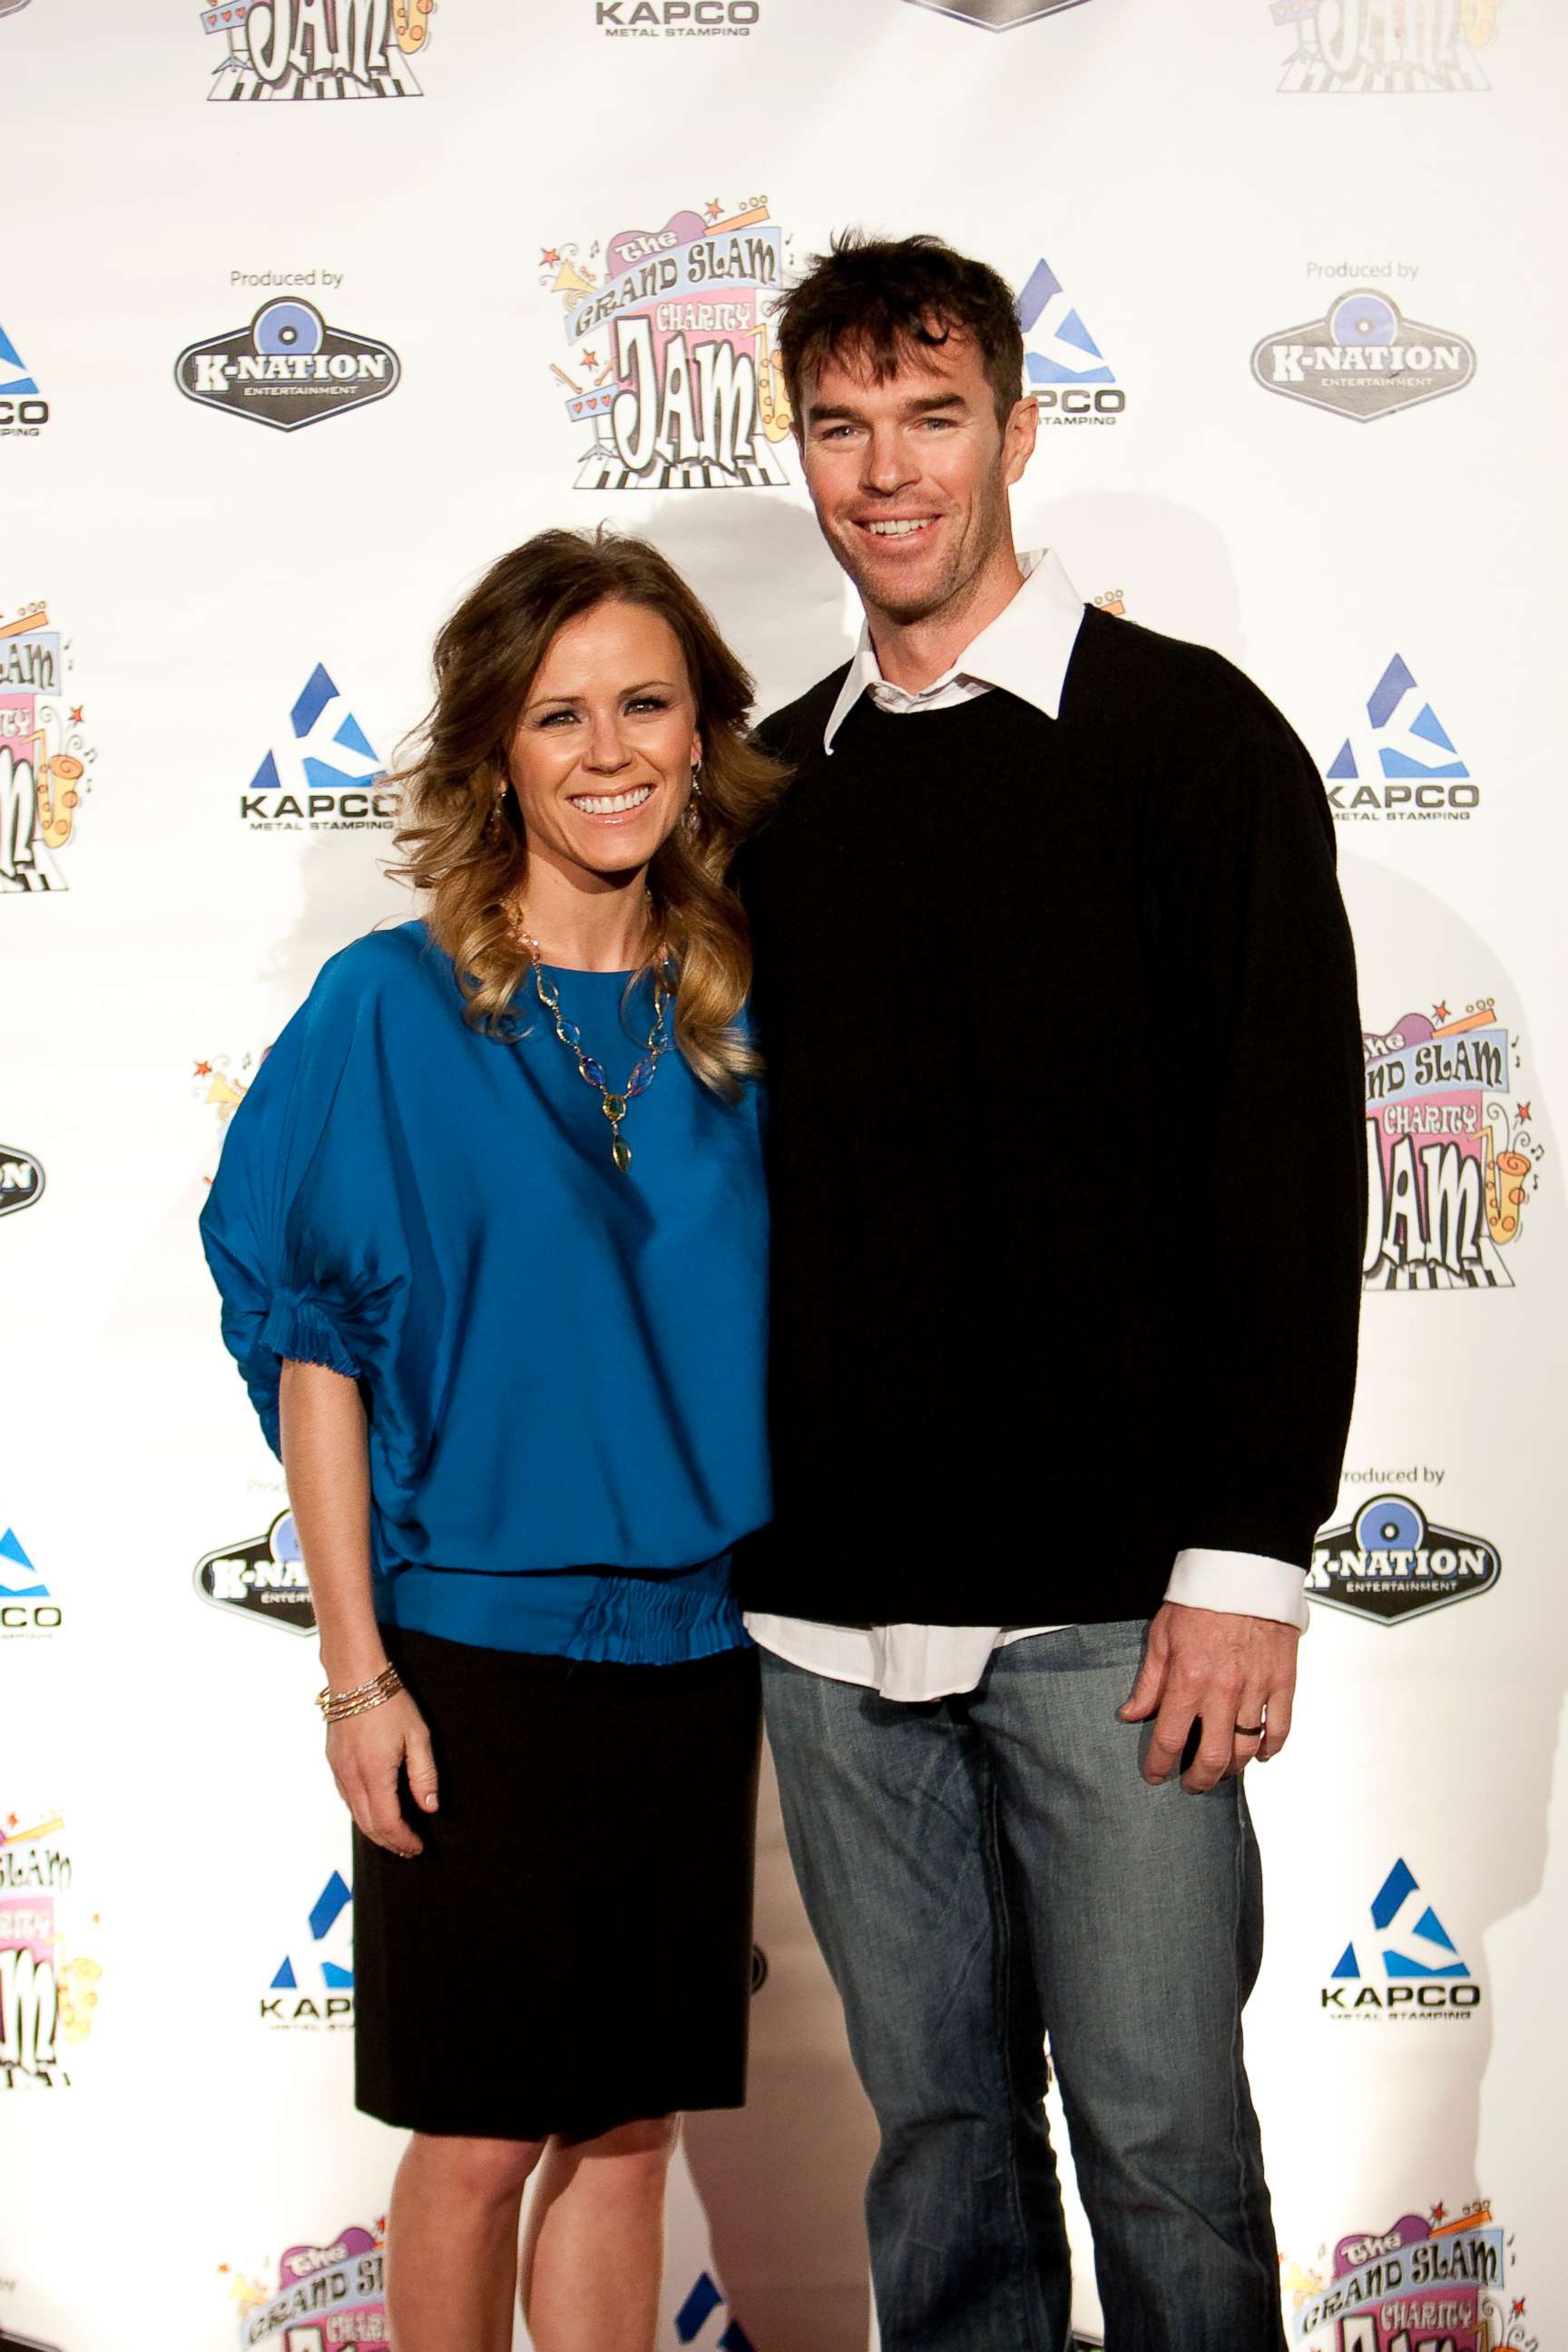 PHOTO: Trista Sutter and Ryan Sutter attends the 2nd annual Grand Slam Charity Jam at the Potawatomi Bingo Casino on March 10, 2012, in Milwaukee, Wis.